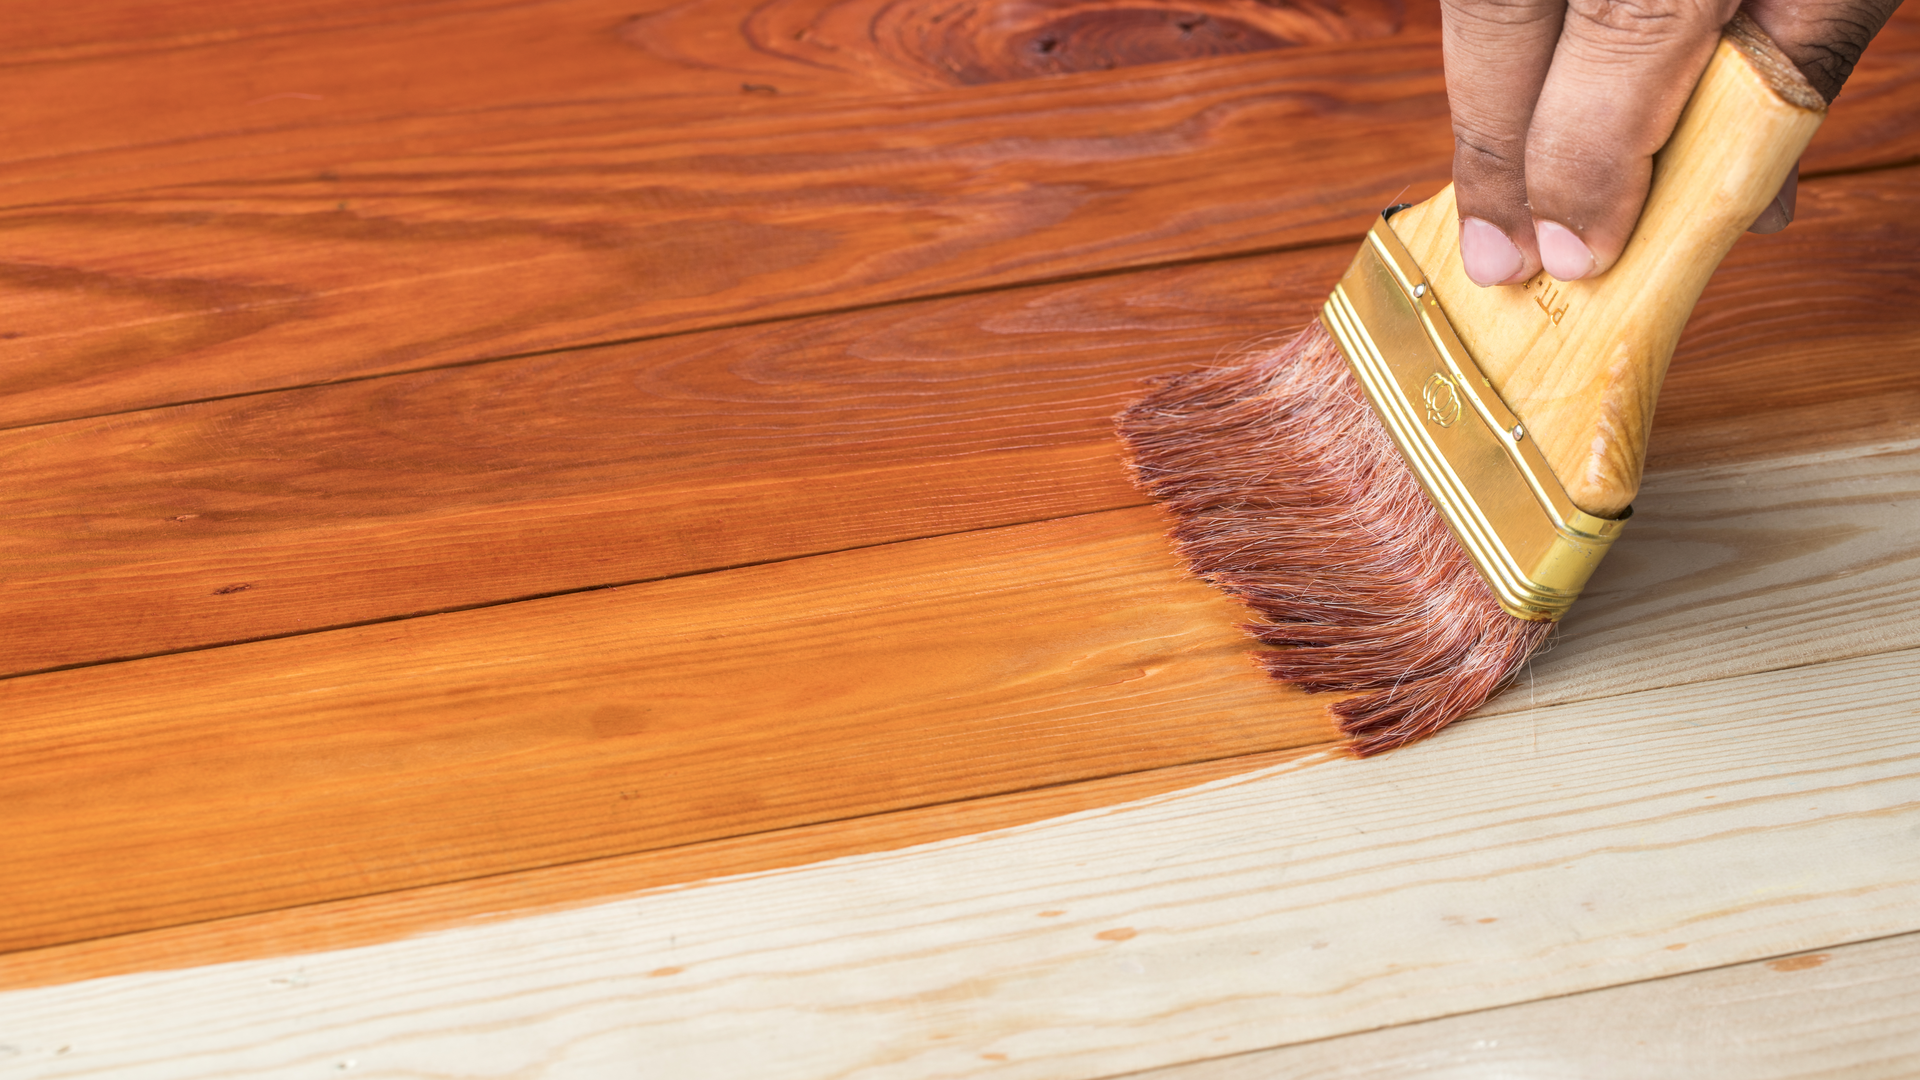 Wood Dye vs. Wood stain; How and When to use each